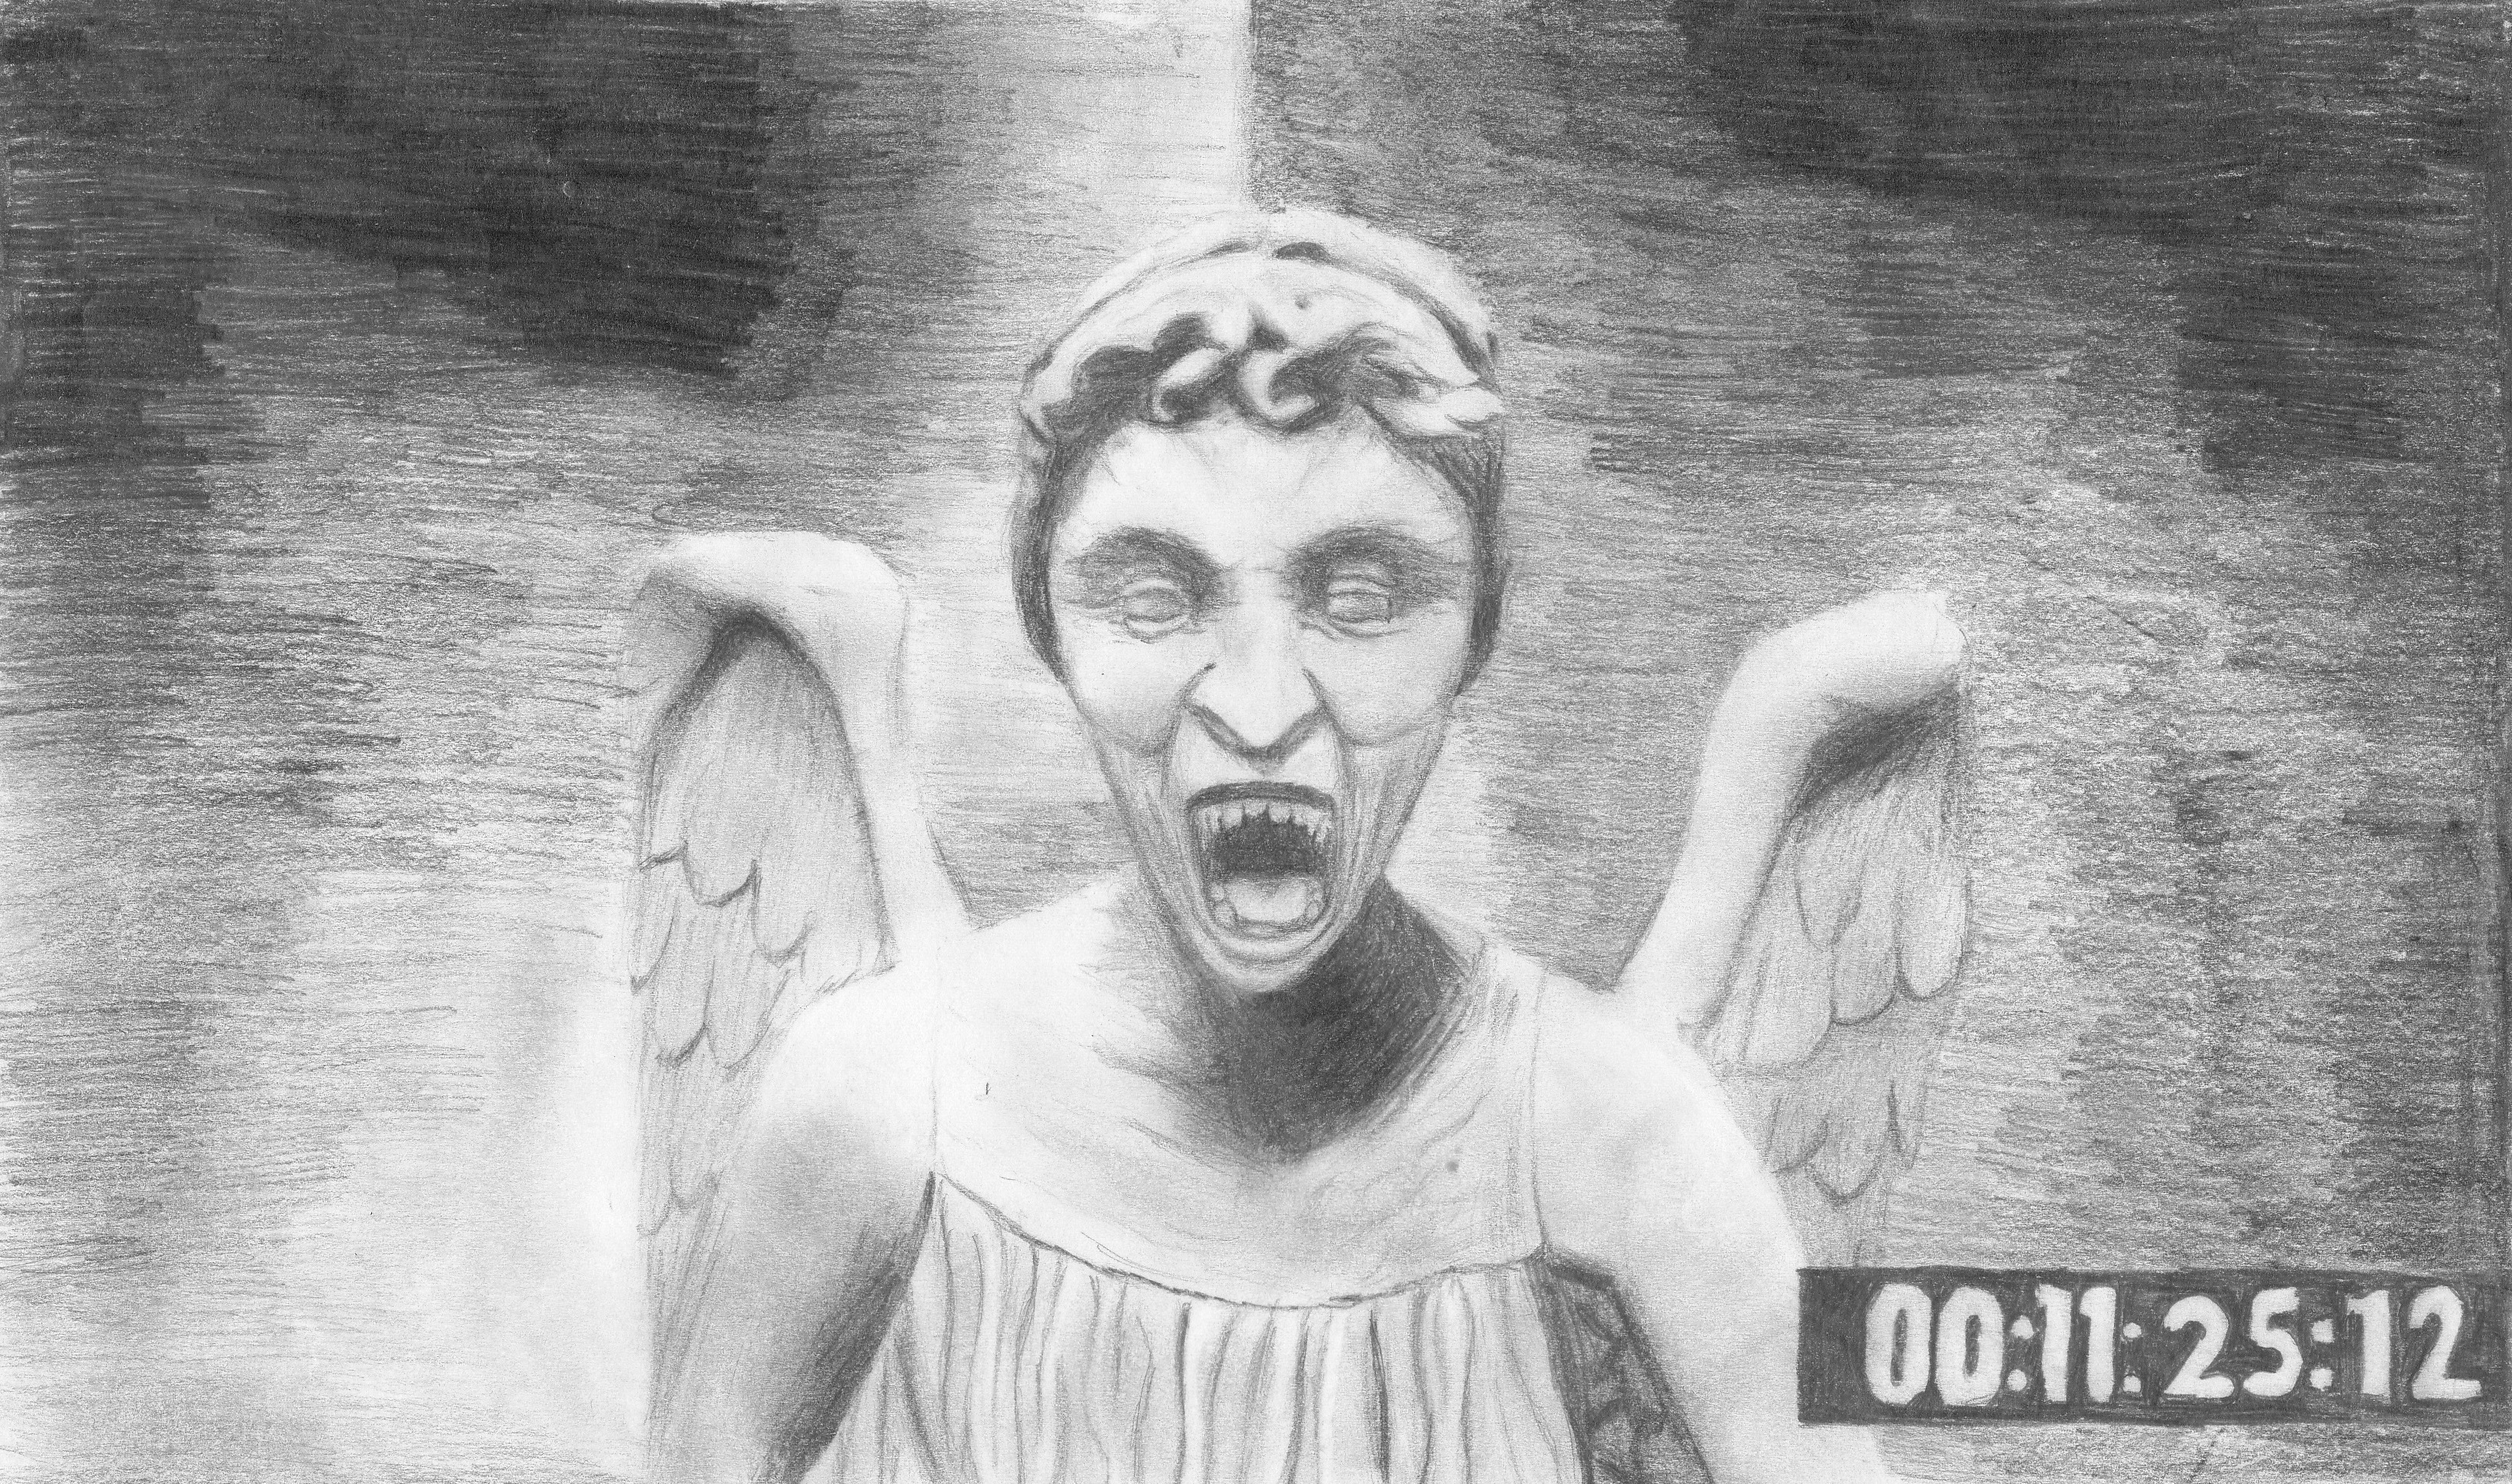 The Weeping Angel by ravenous-hunger on DeviantArt